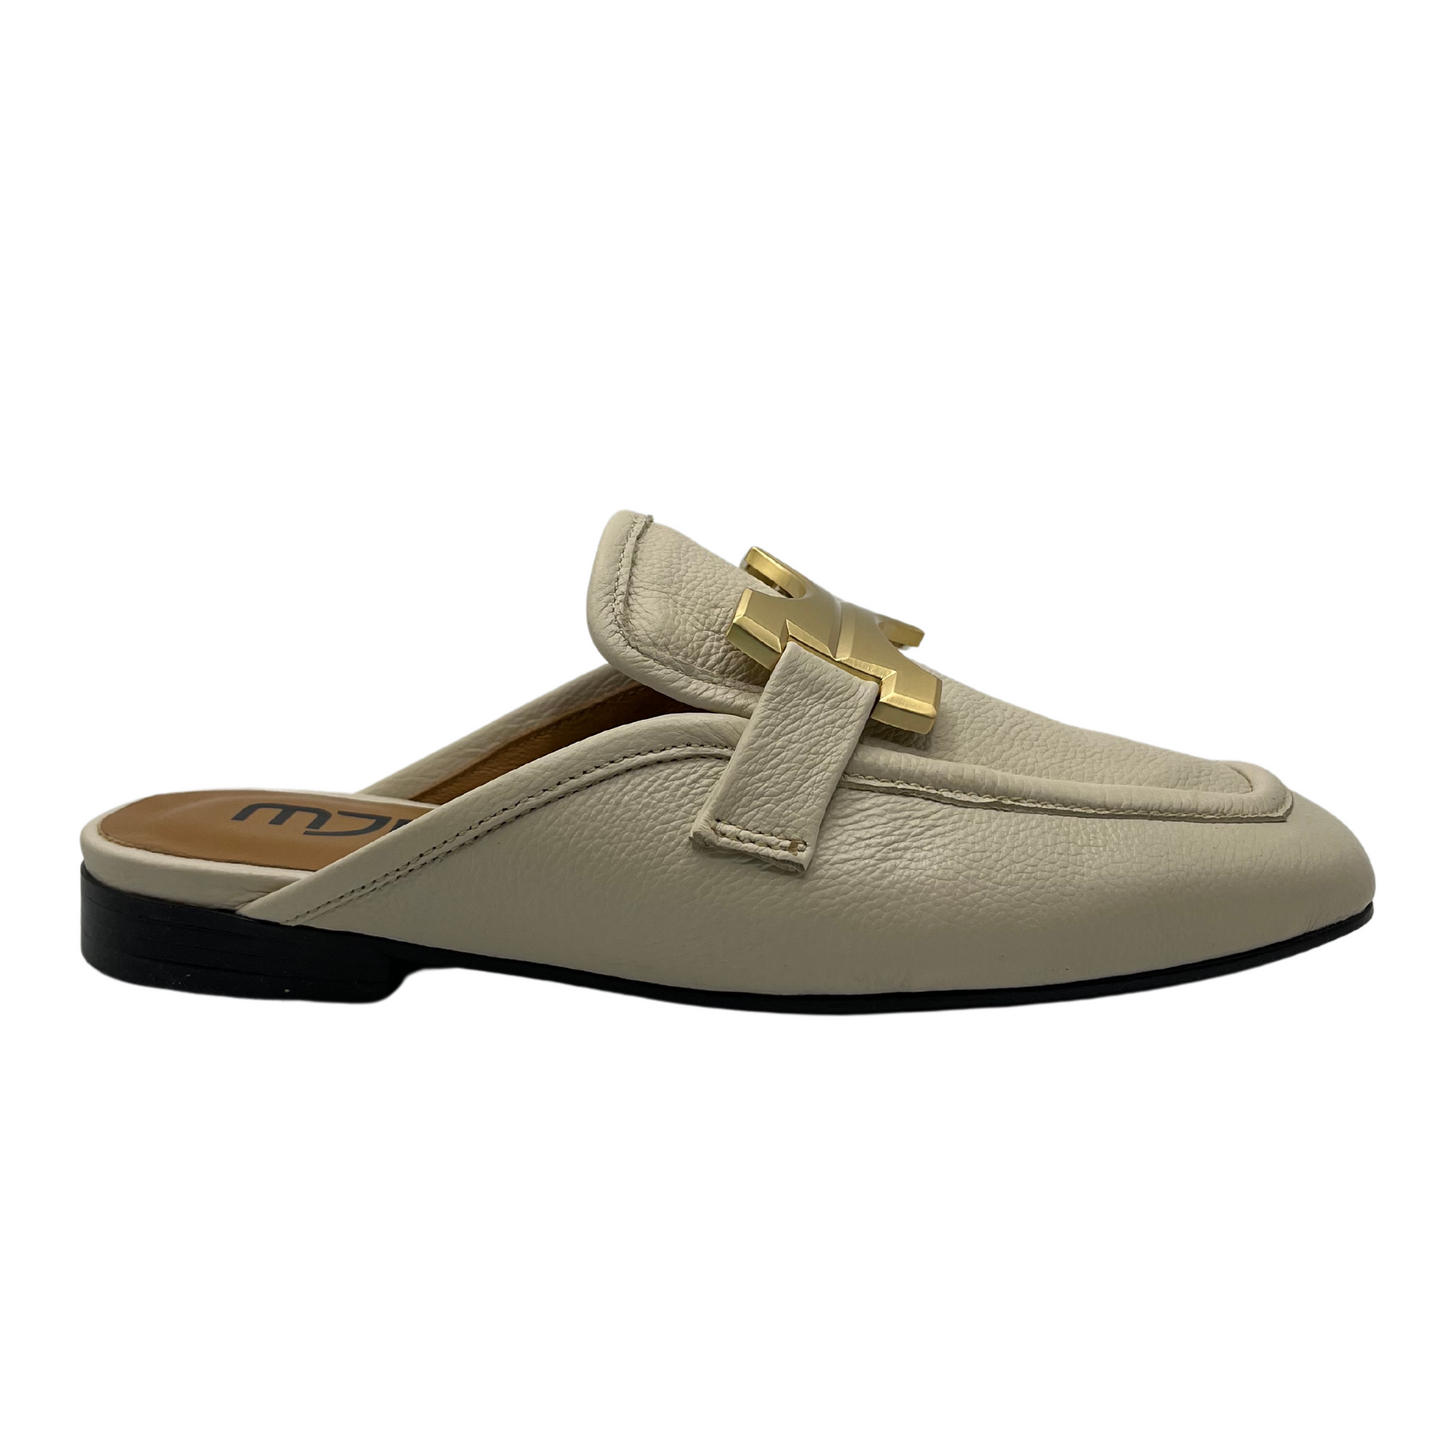 Right facing view of latte leather slip on loafer with short block heel